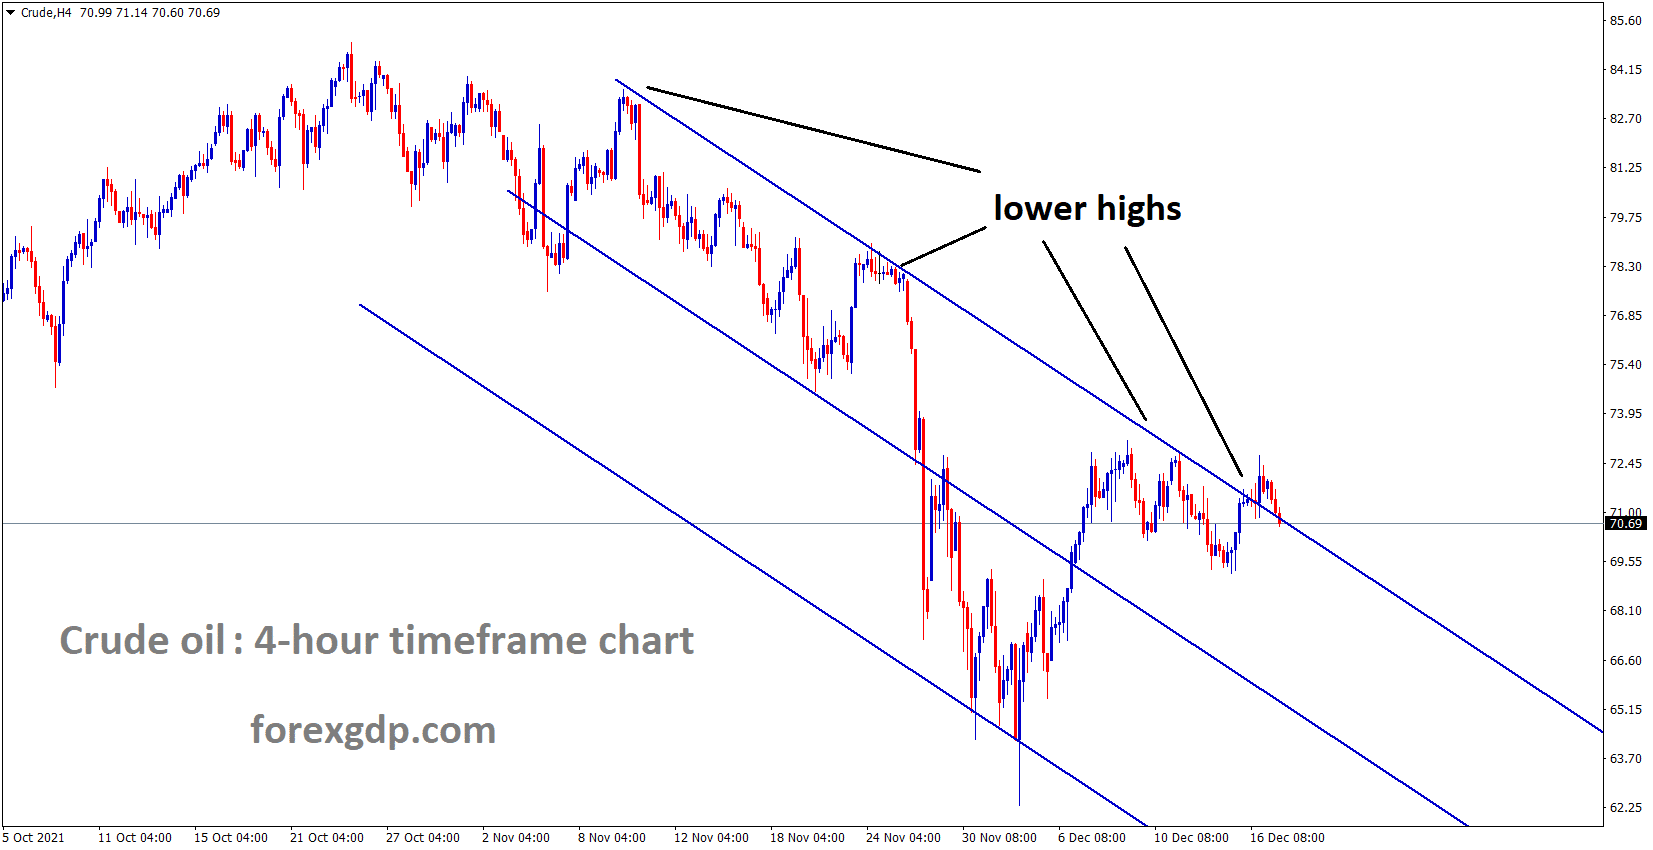 Crude oil price is moving in the Descending channel and the market falling from the lower high area of the channel